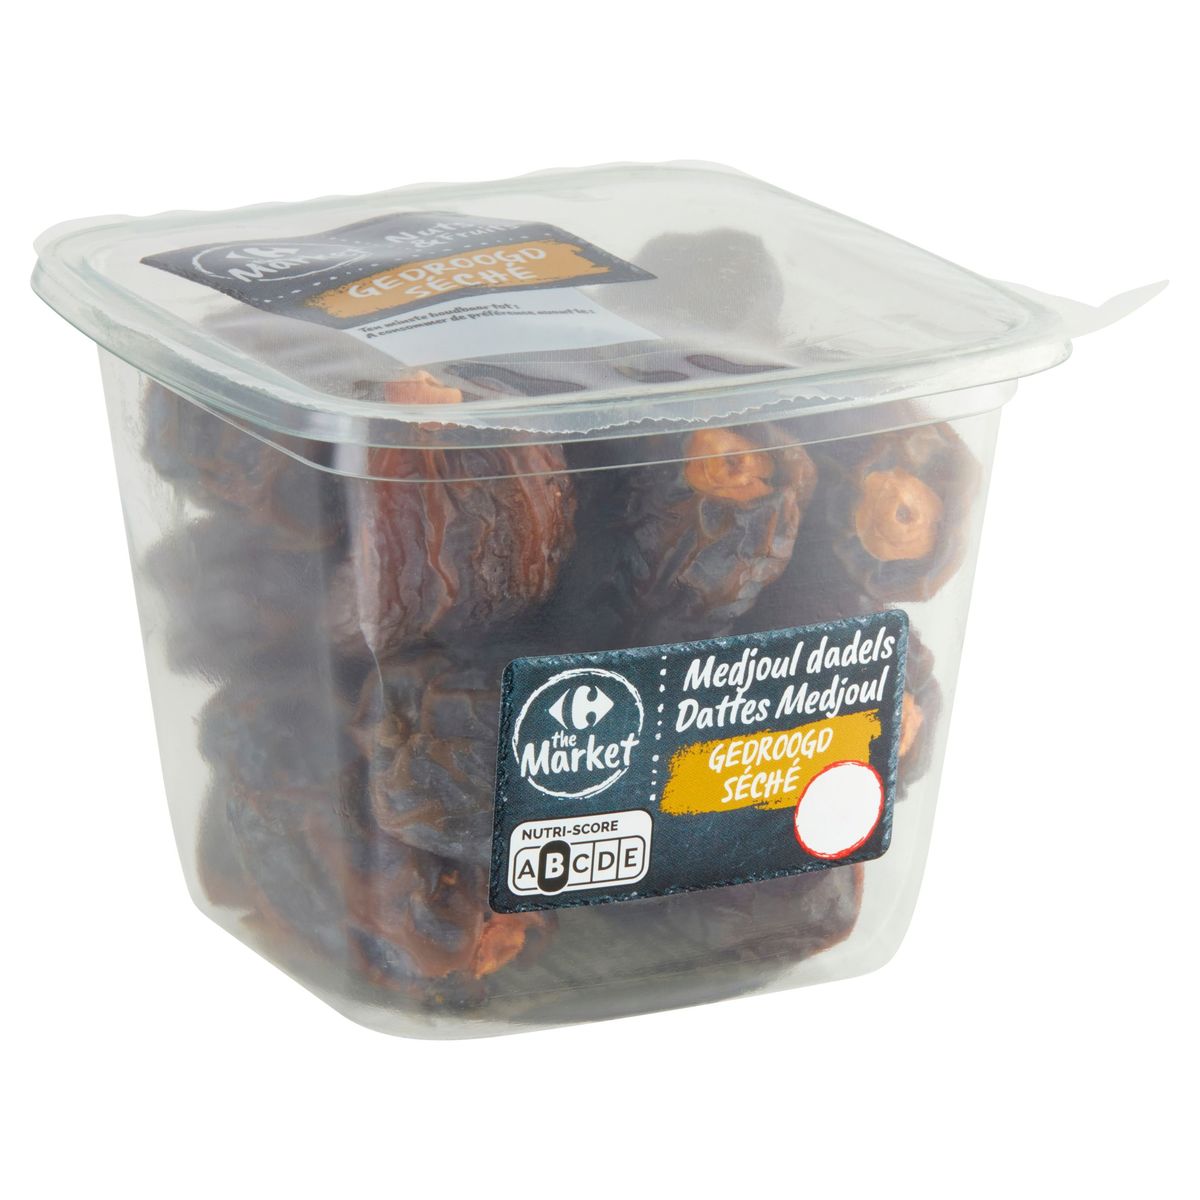 Carrefour The Market Nuts & Fruits Medjoul Dadels Gedroogd 250 g